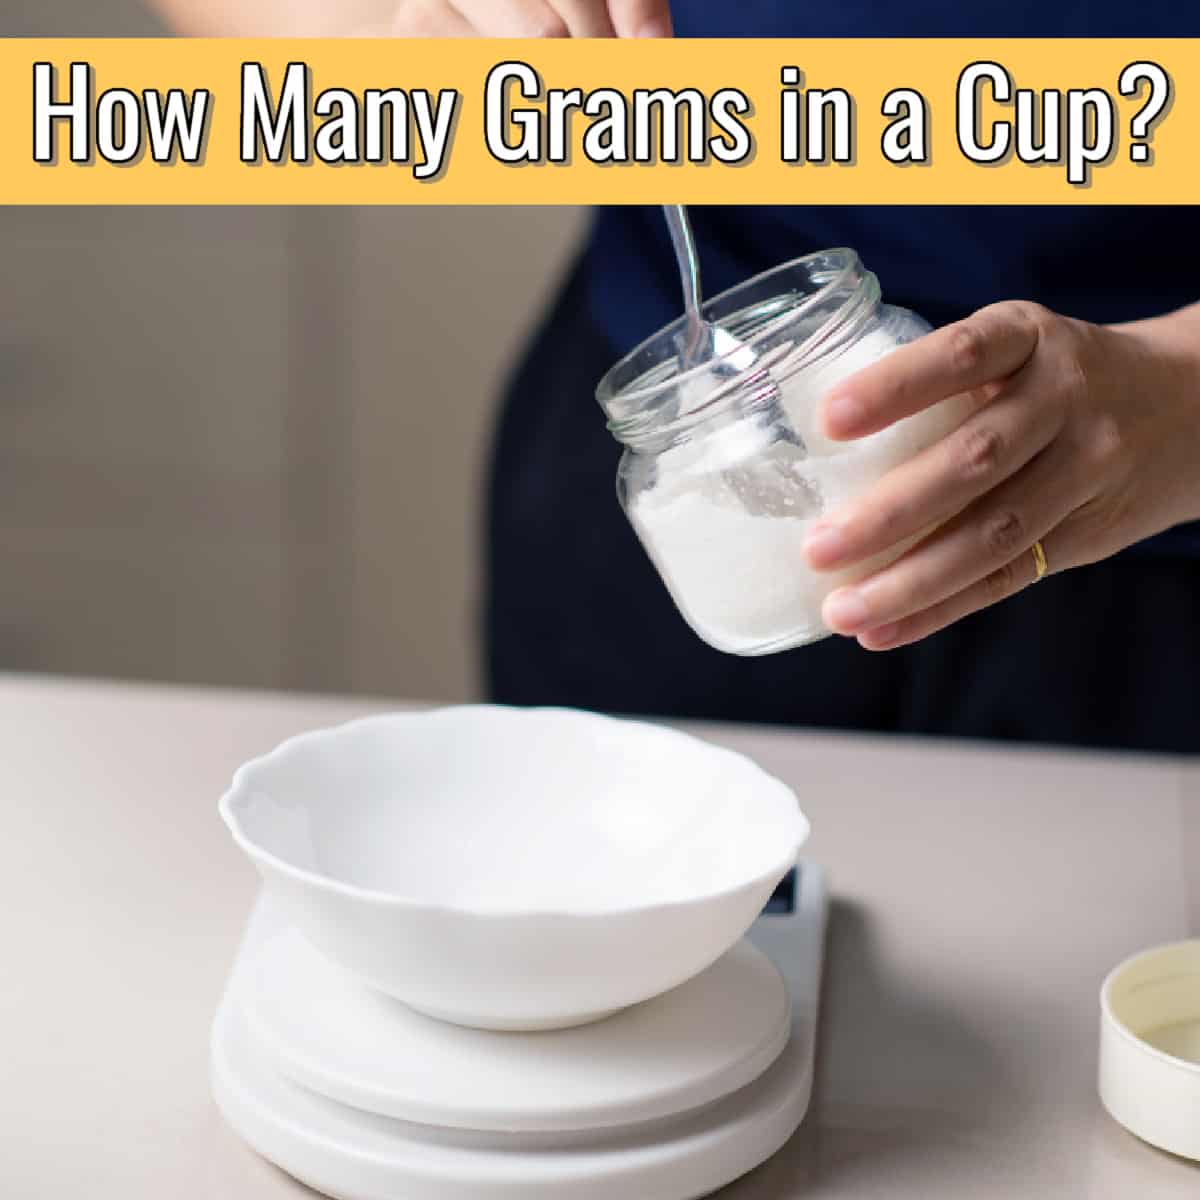 spoon and jar of sugar and a kitchen scale measuring how many grams are in a cup